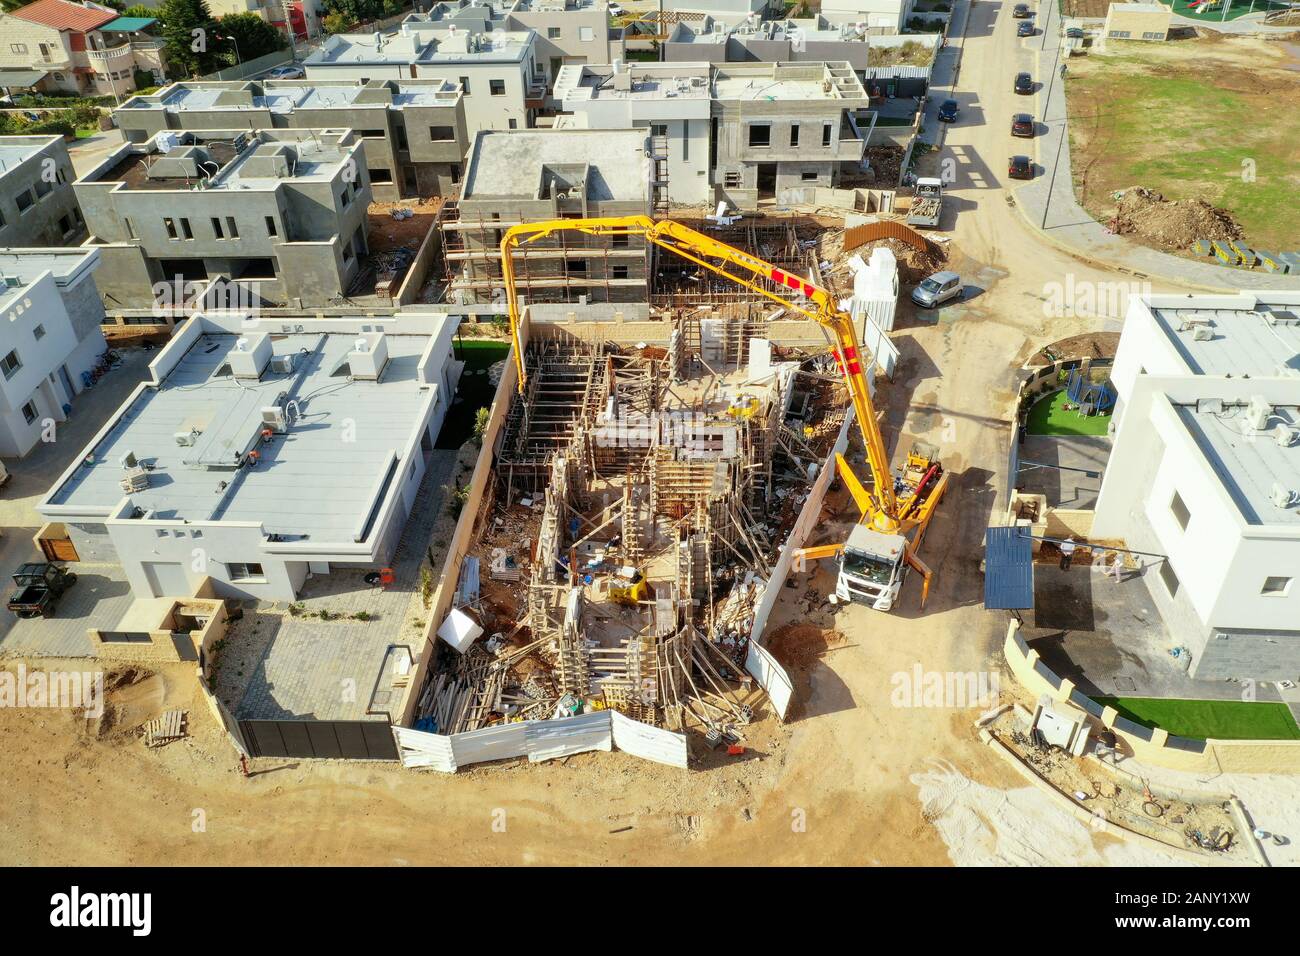 Concrete pump working on a large foundation pour at a new Suburban development site, Aerial view. Stock Photo